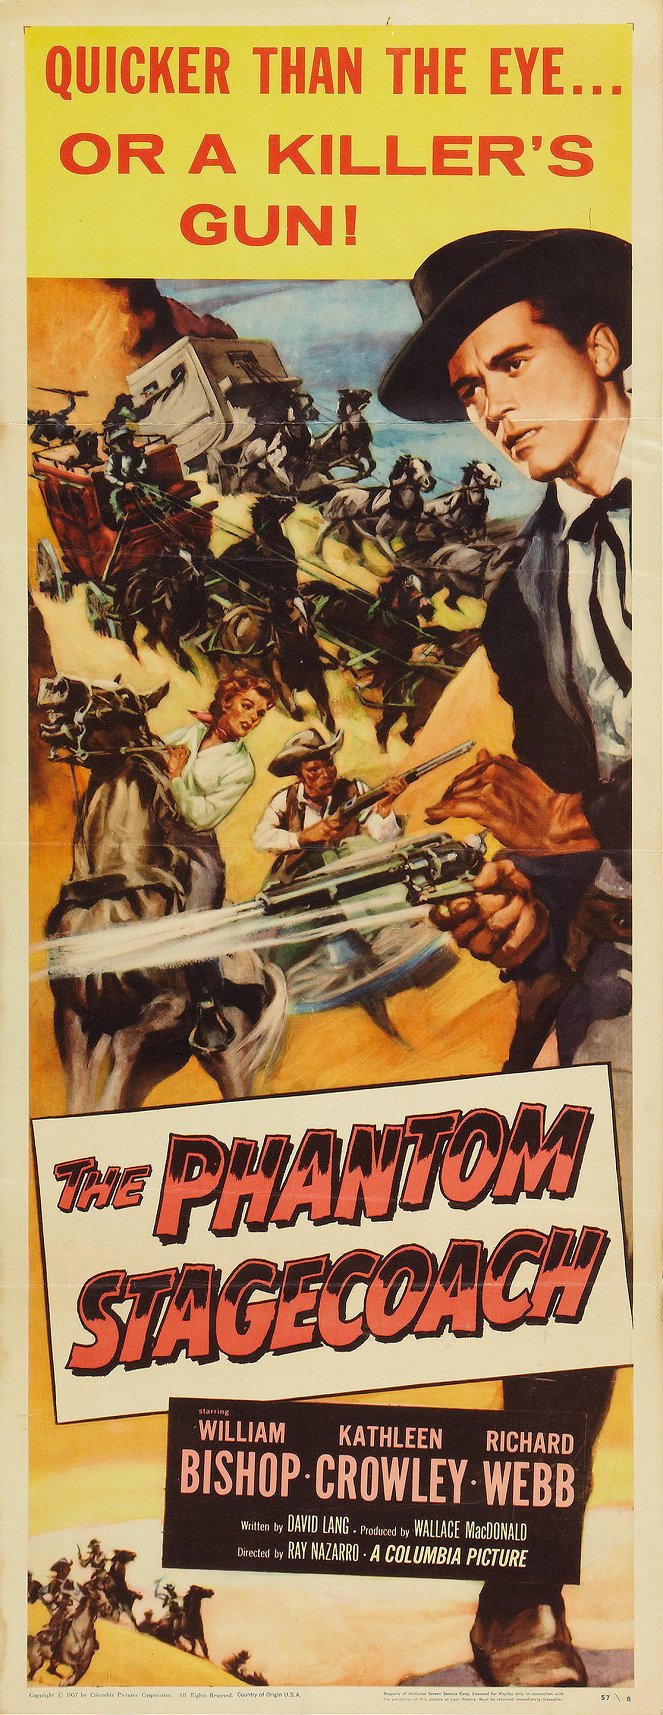 The Phantom Stagecoach - Affiches